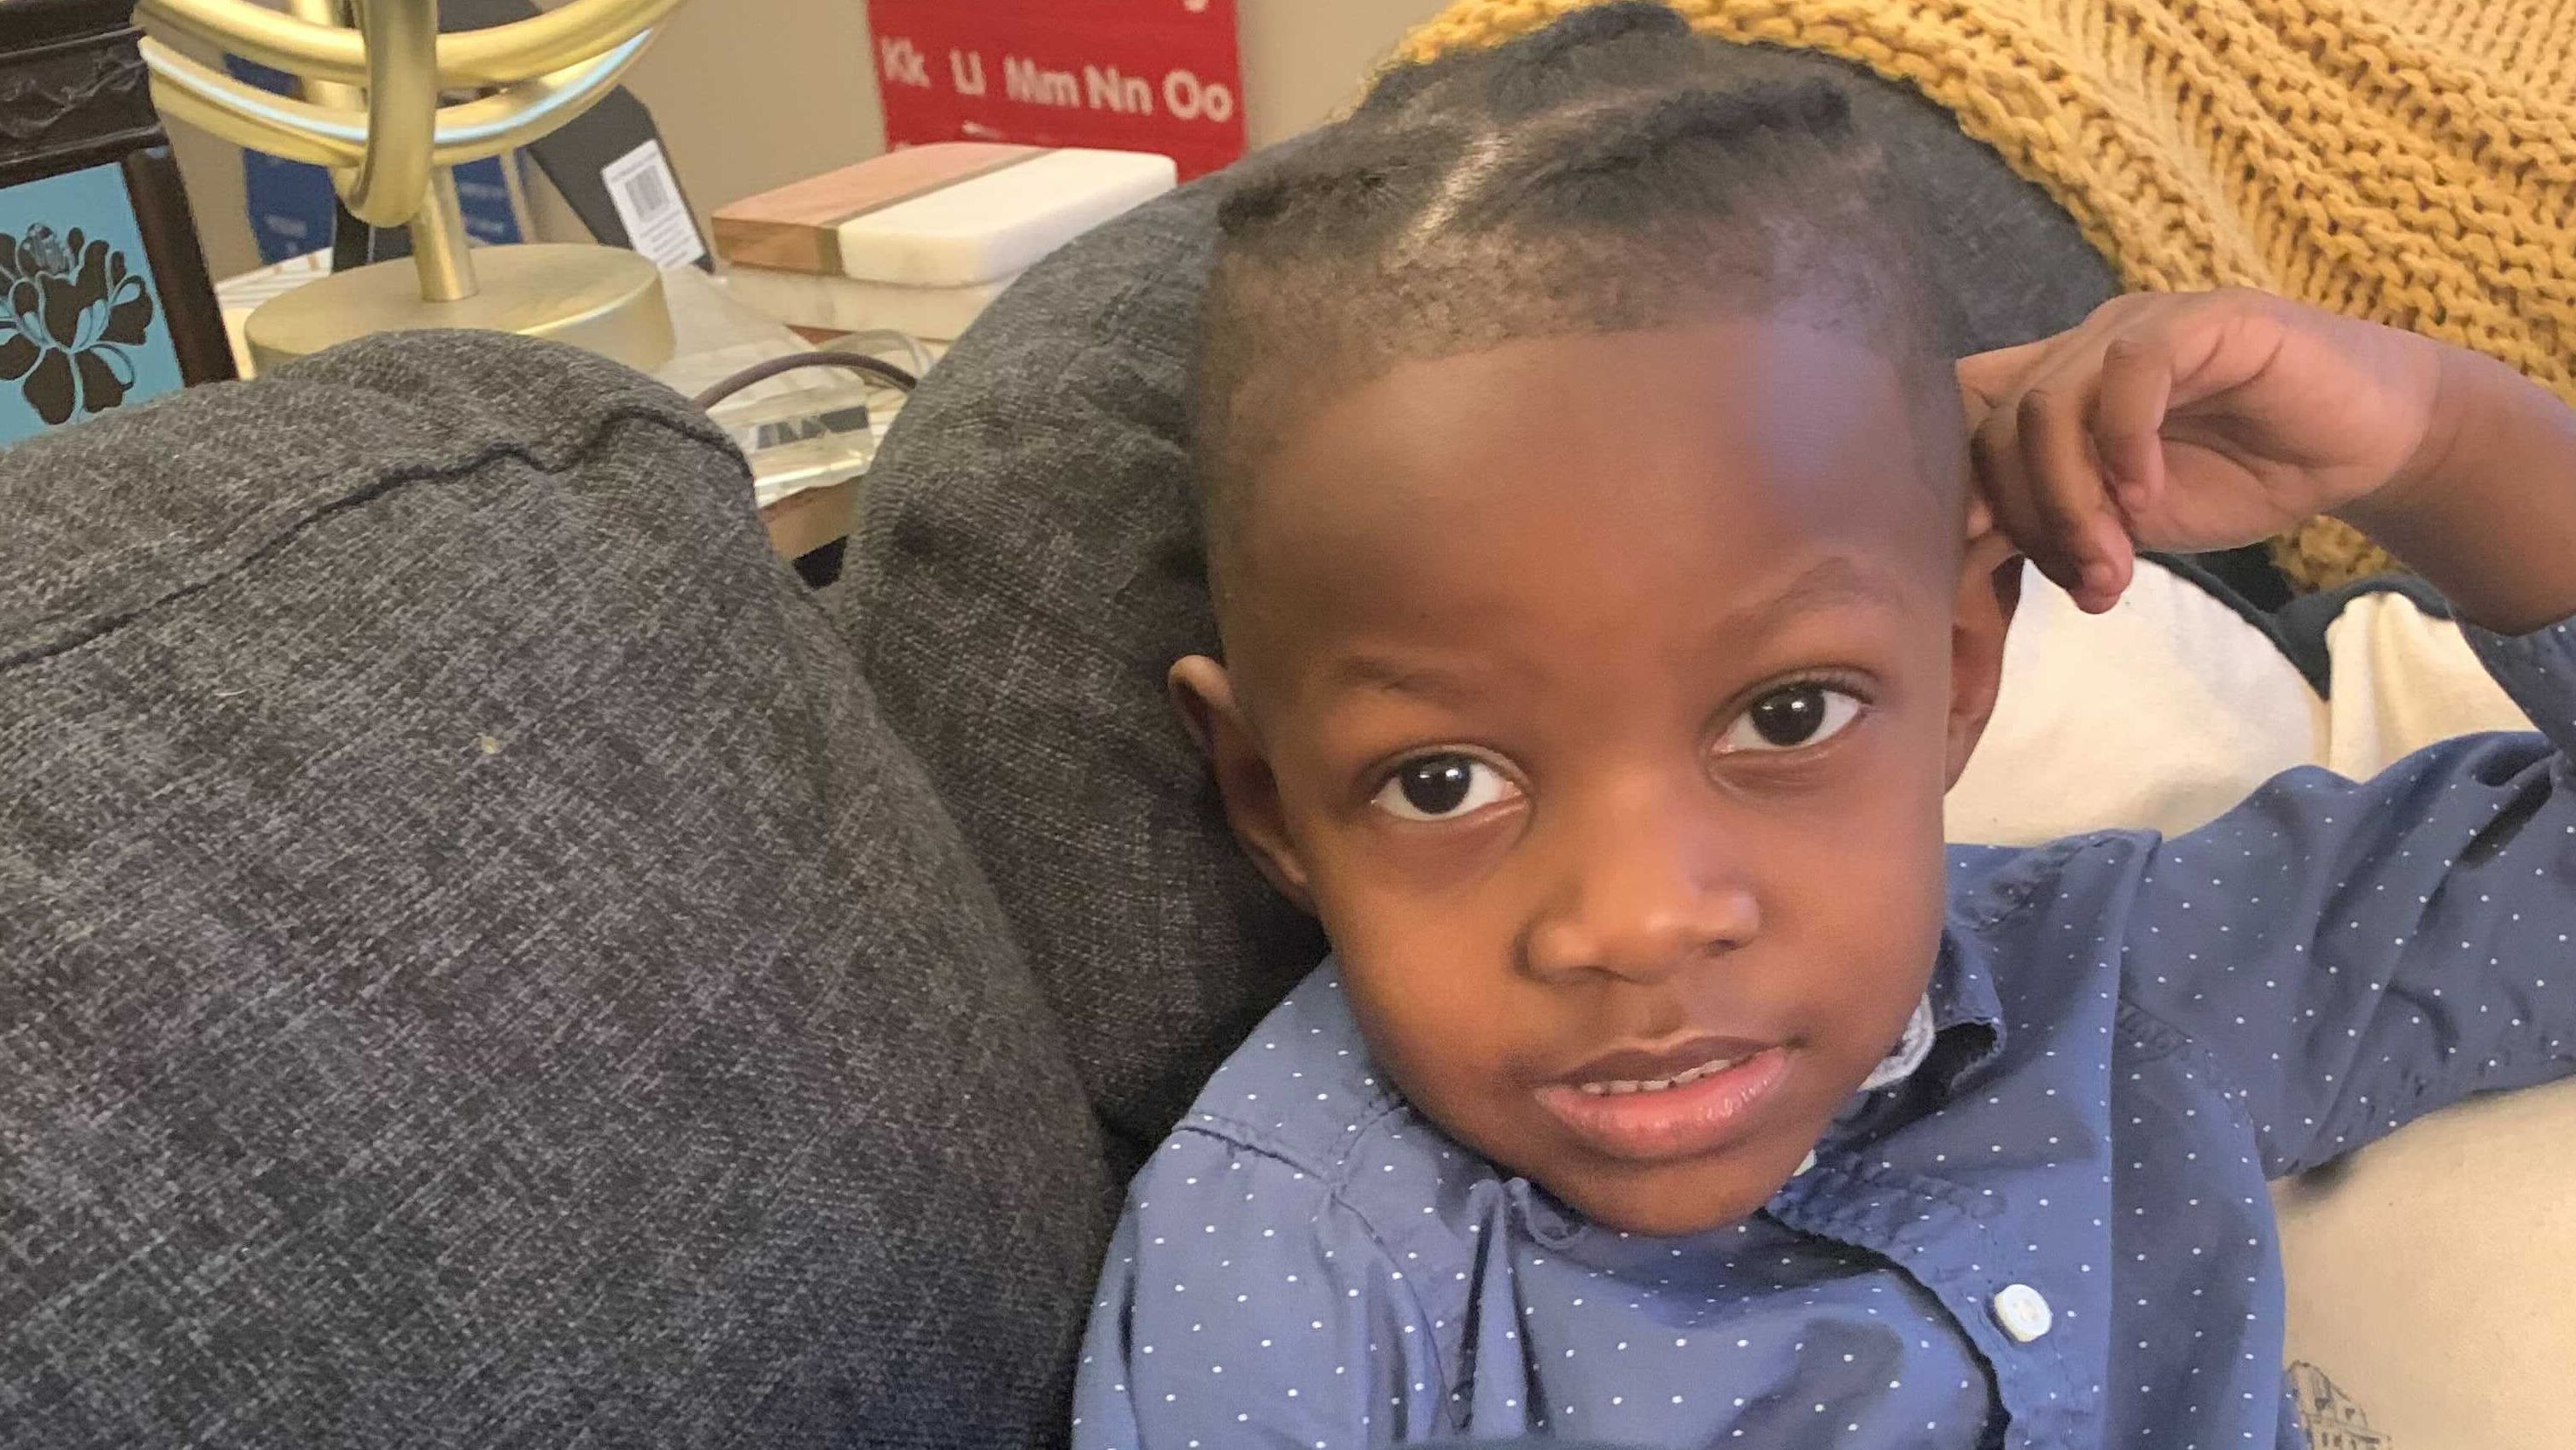 Four-year-old Gus Hawkins IV, known as "Jett," will be transferring to another  school, his mom says.